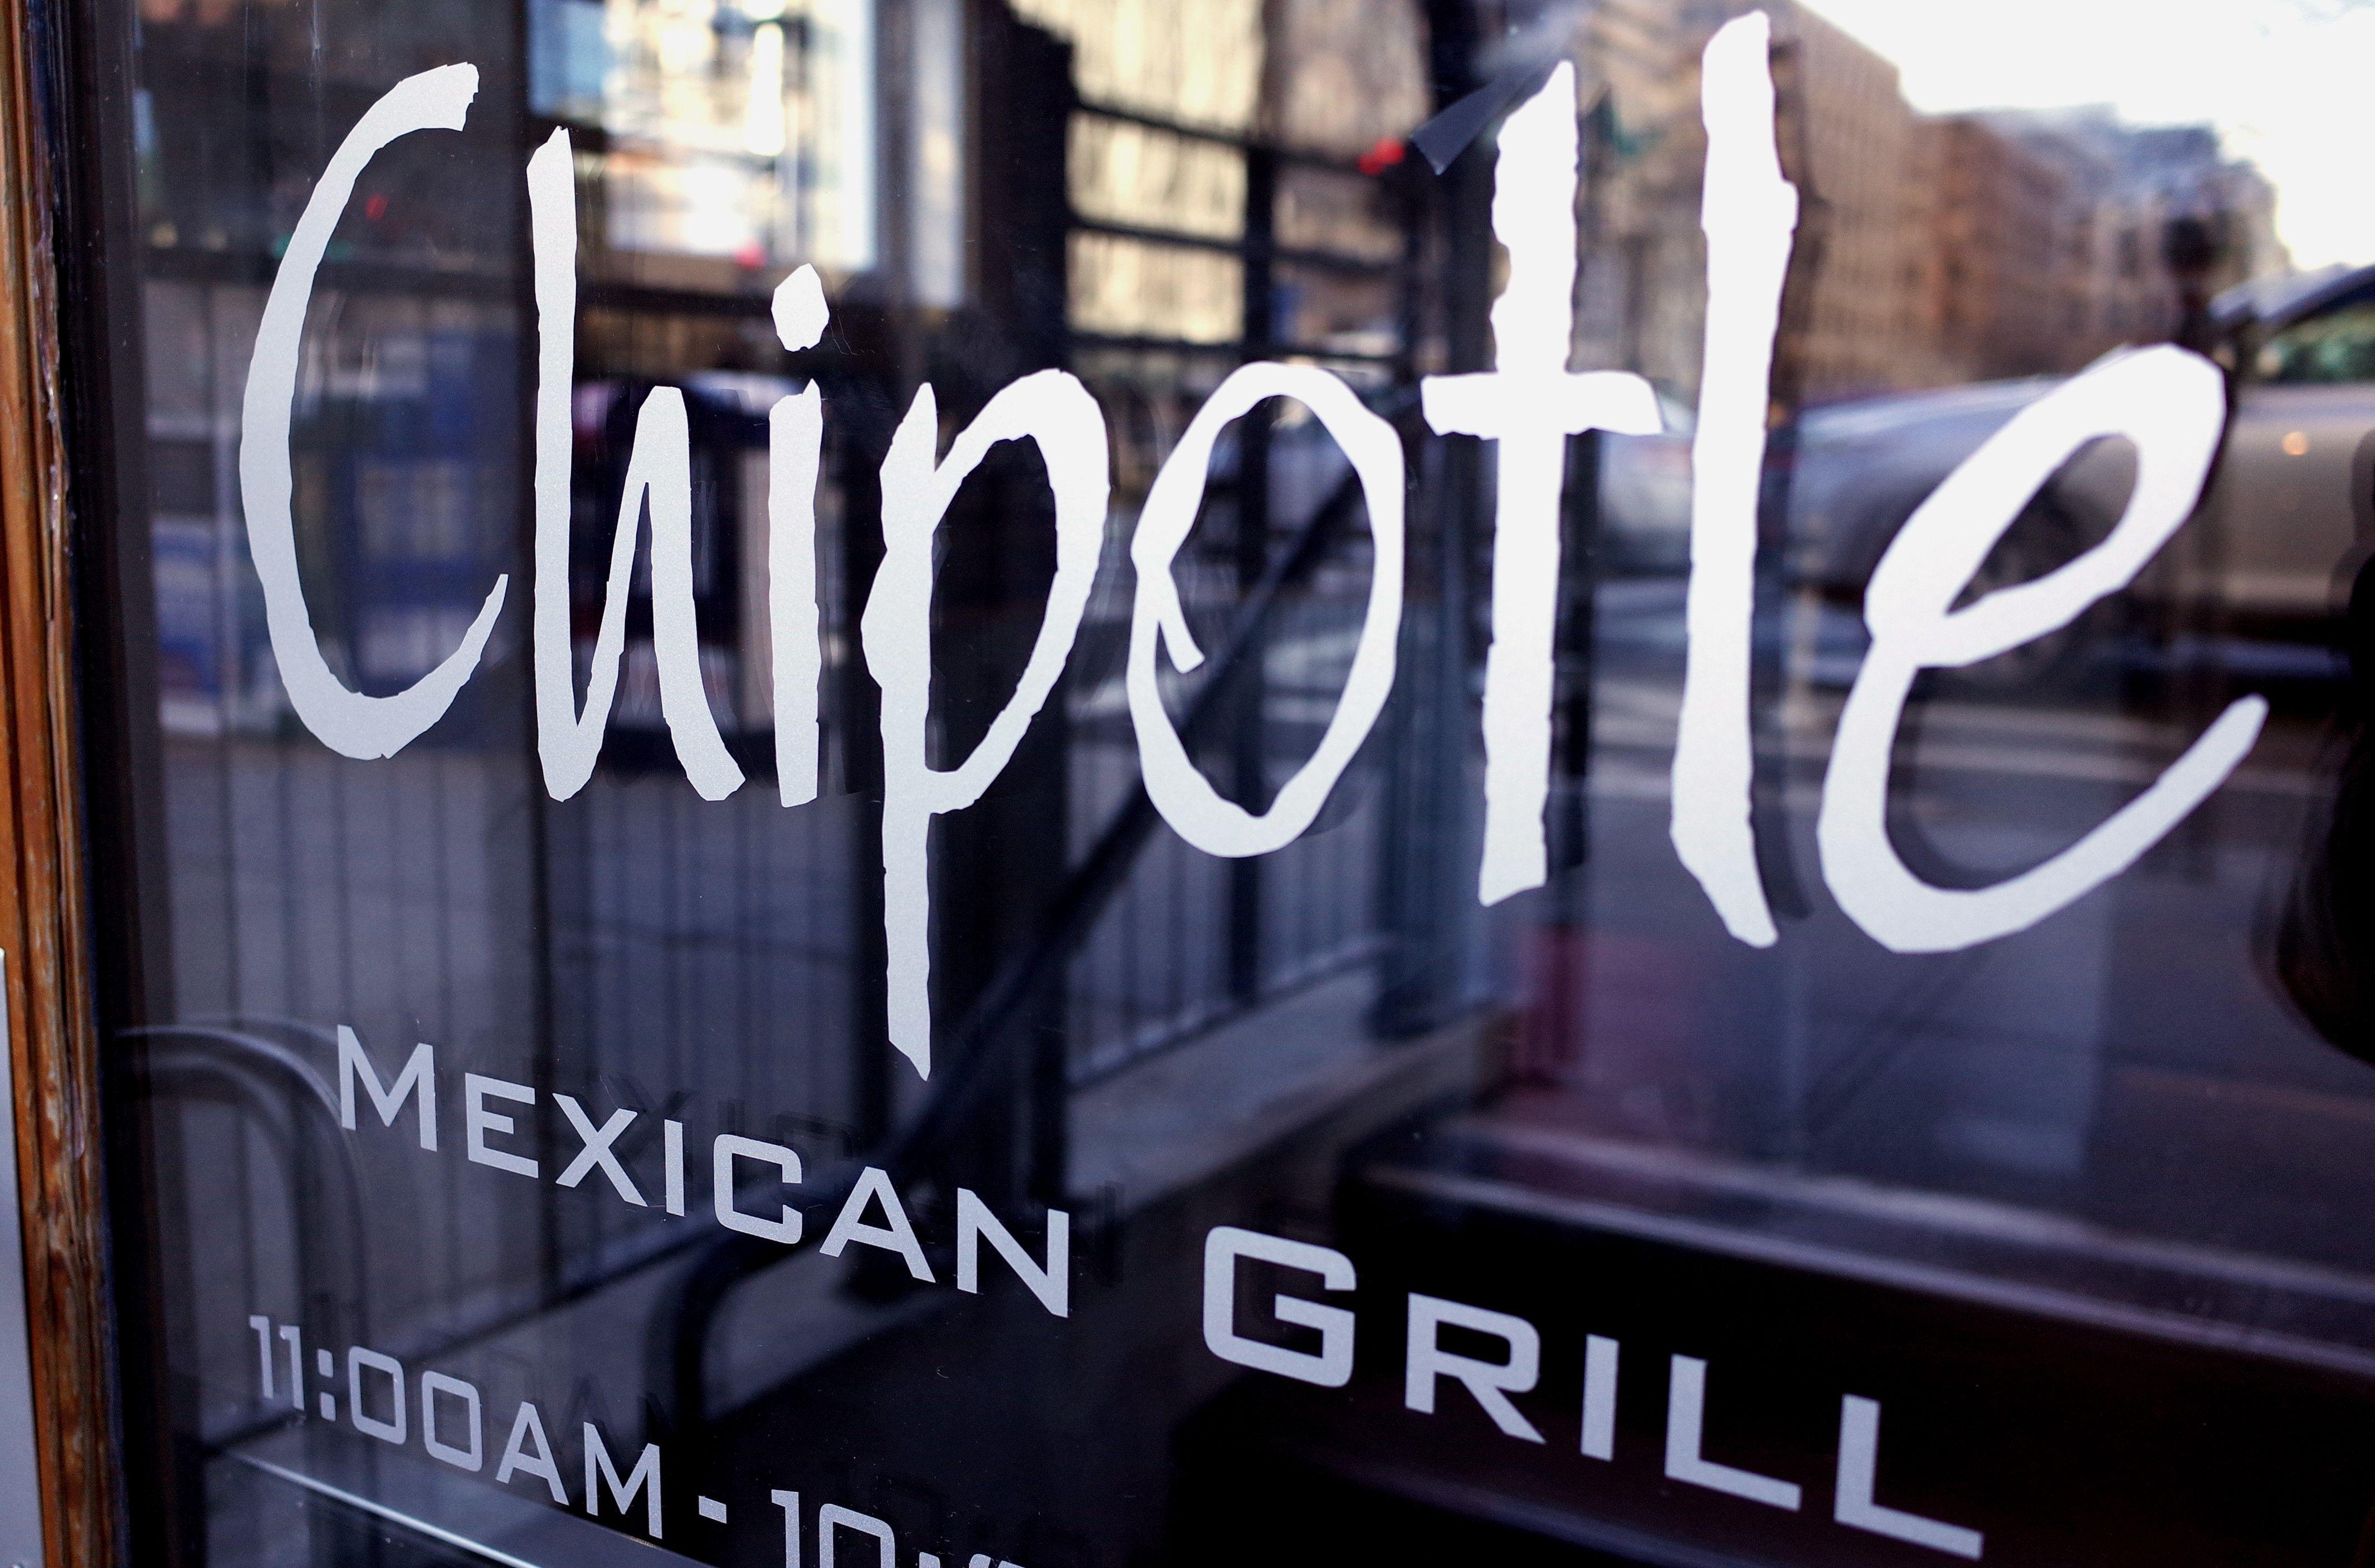 Chipotle Mexican Grill Logo - A Boston Burger Chain Is Accusing Chipotle of Stealing Its Name and ...